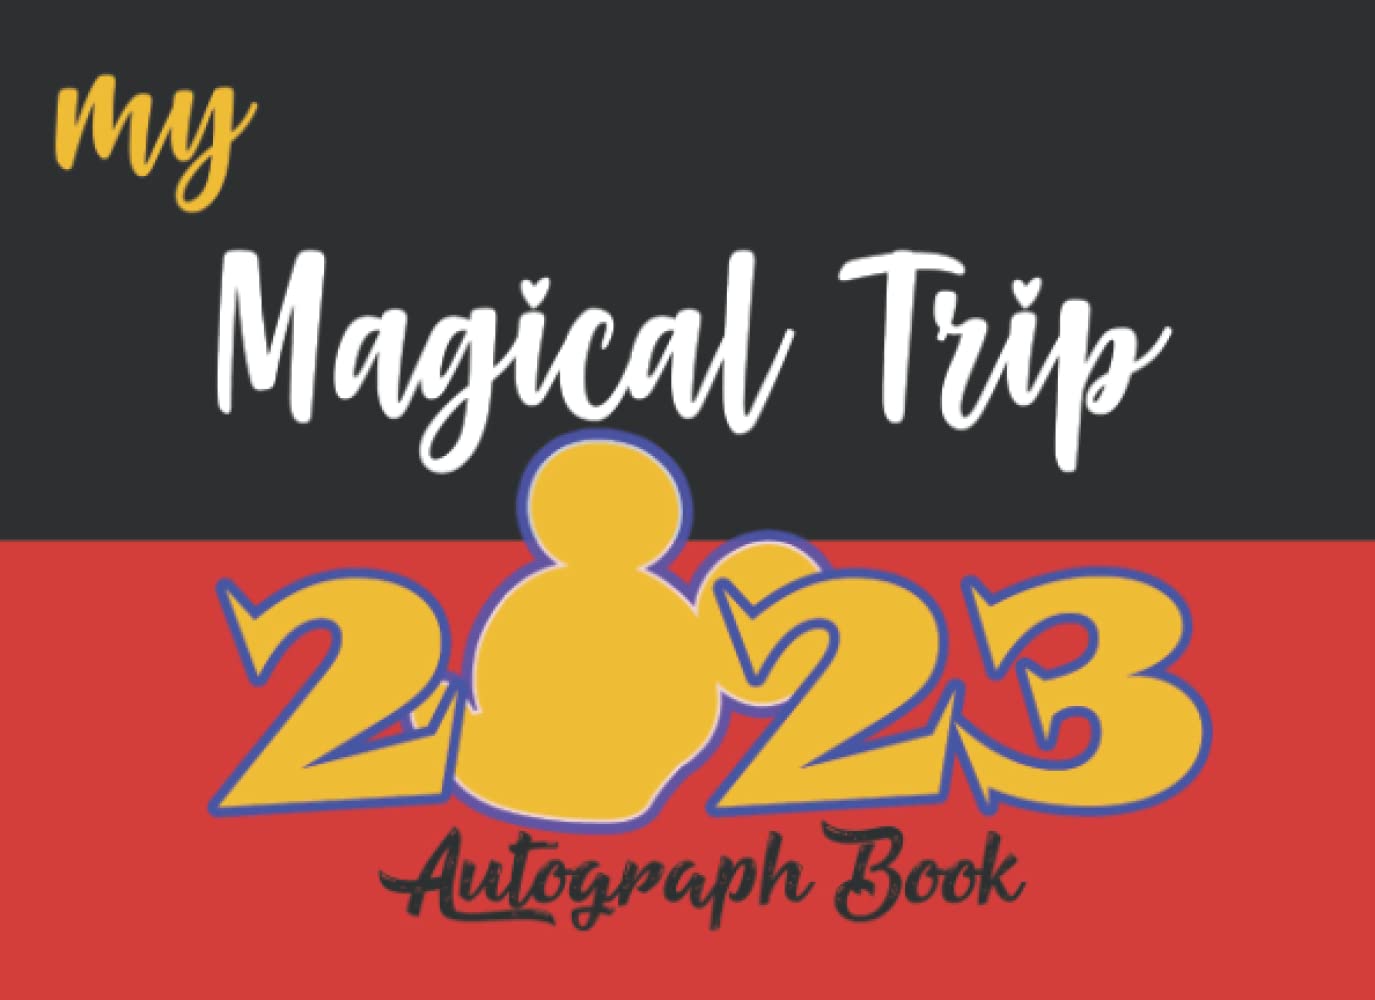 51tSS9UFY4L - Autograph Book: My Magical Trip 2023 | Collect Character Signatures from Theme Park Adventures